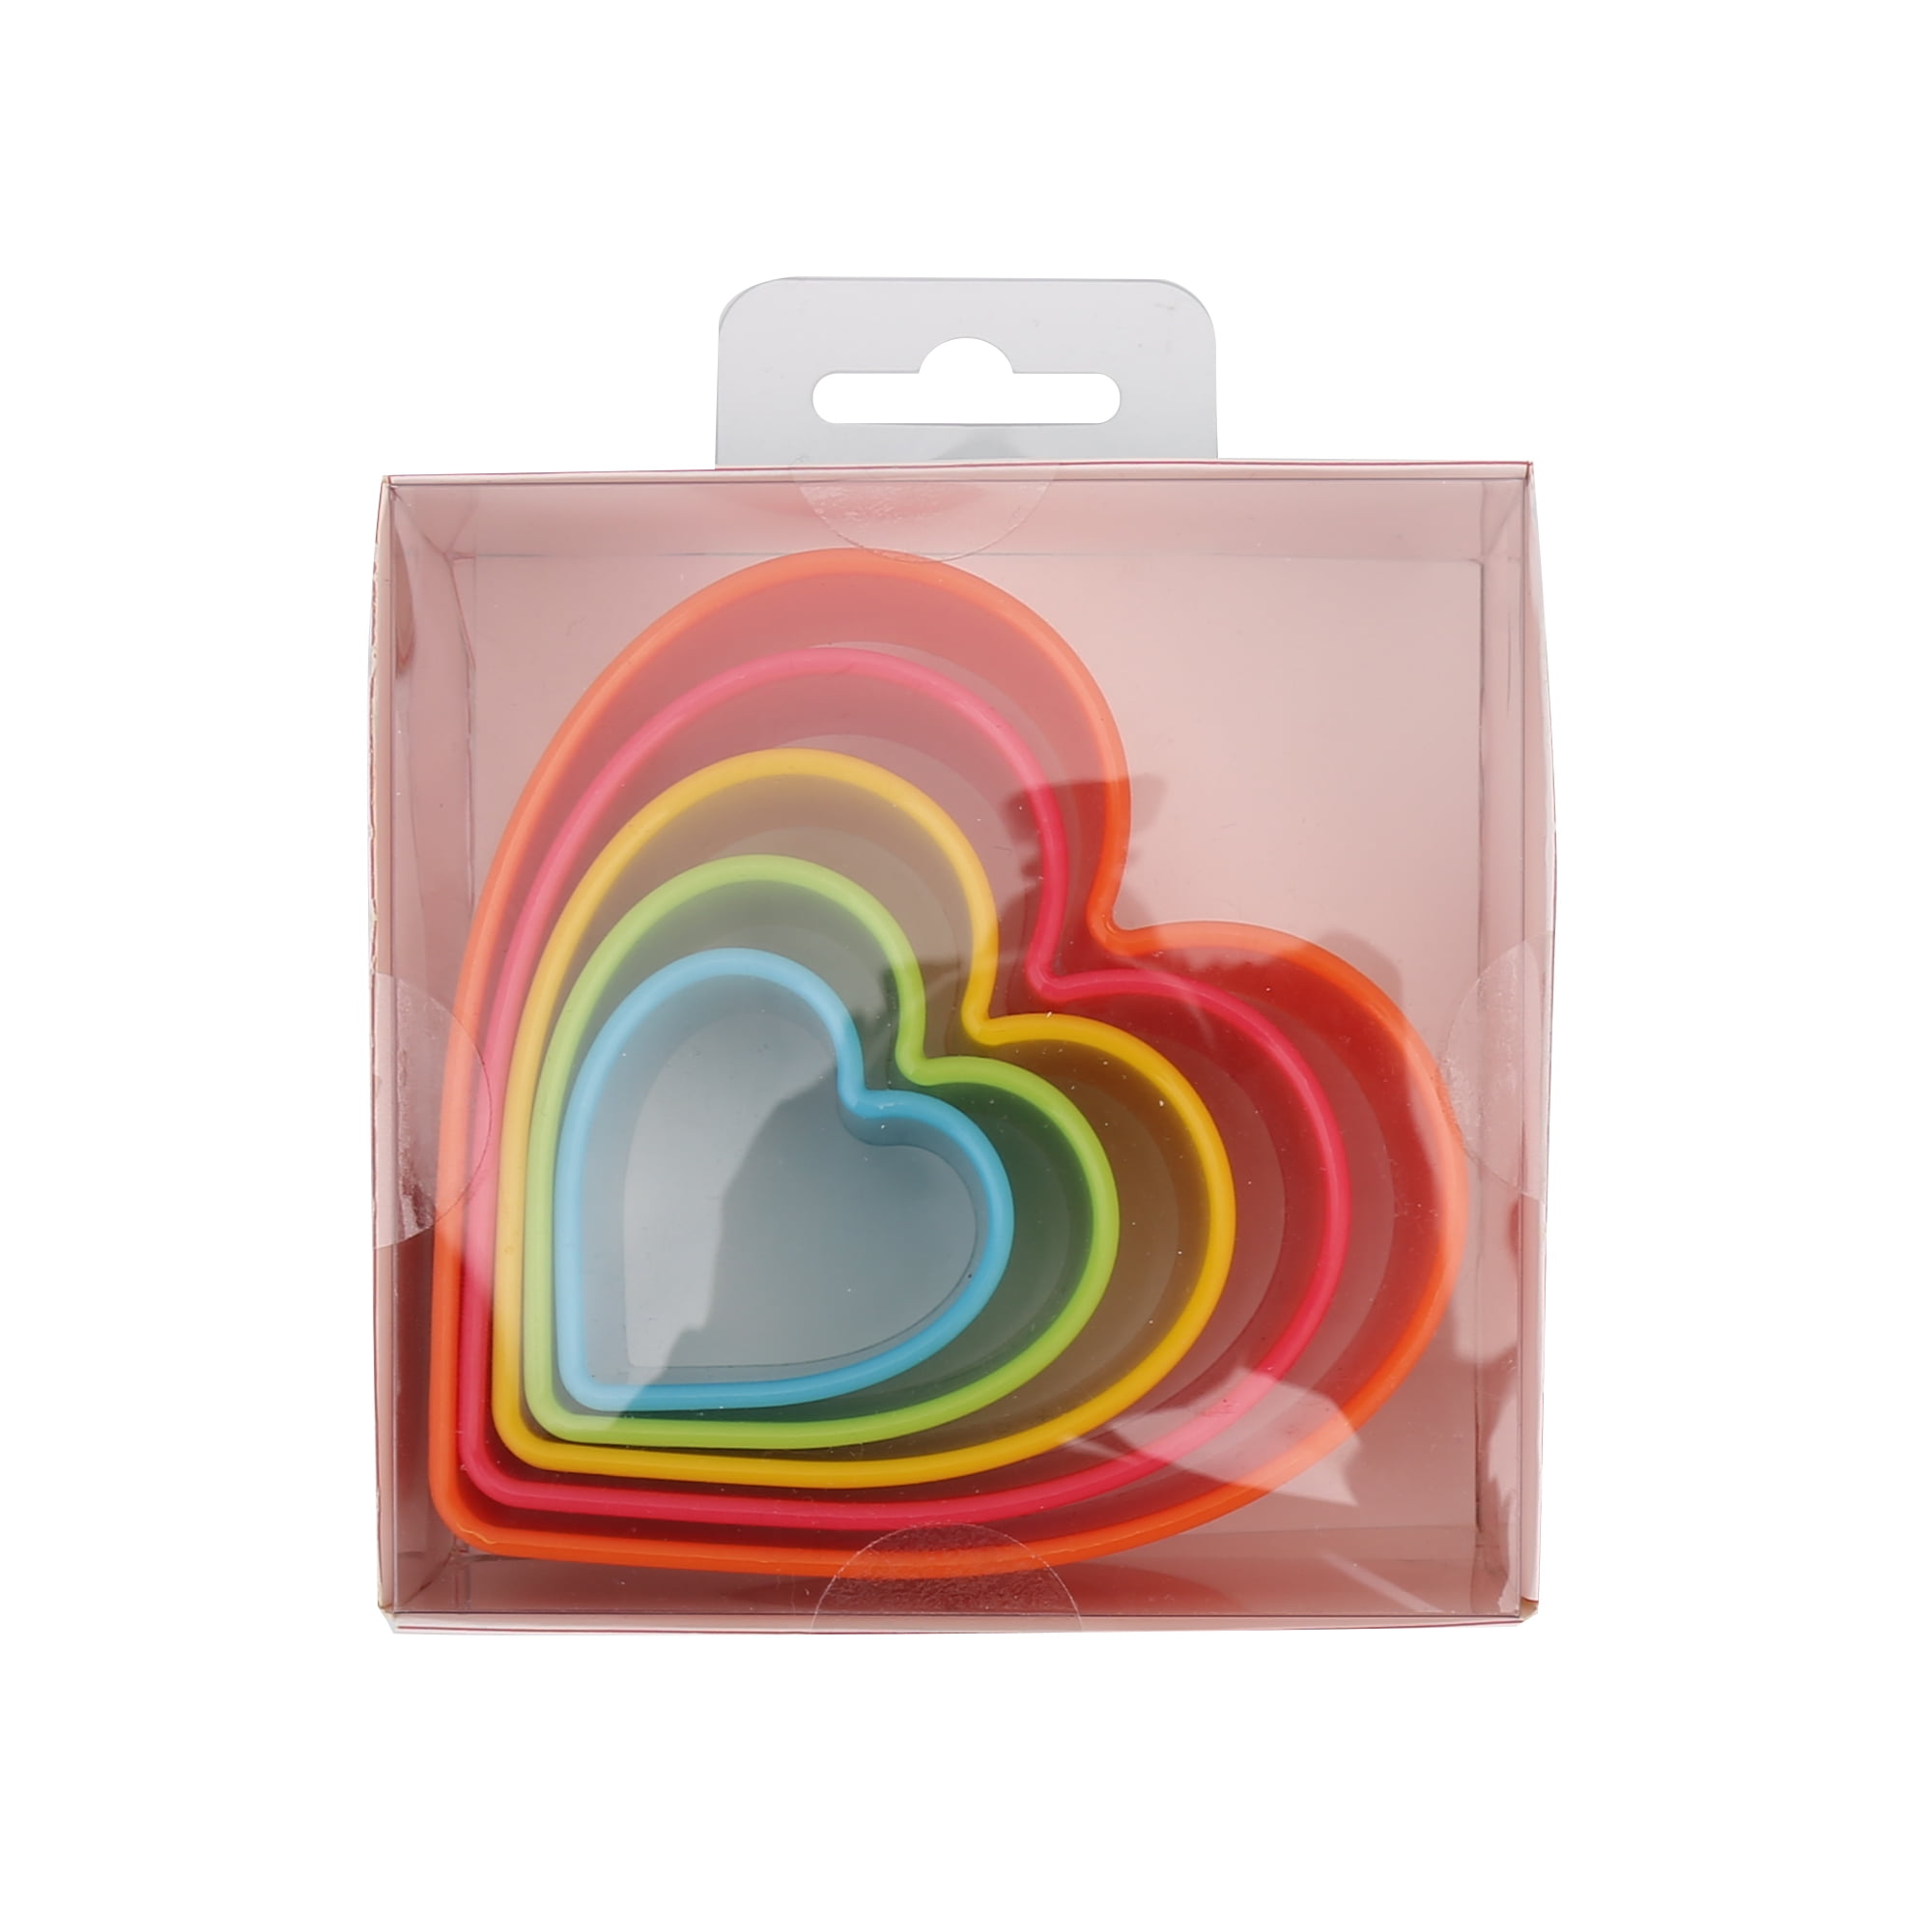 Heart Shaped Cookie Cutter. Set Of 6 In Multiple Sizes And Colors